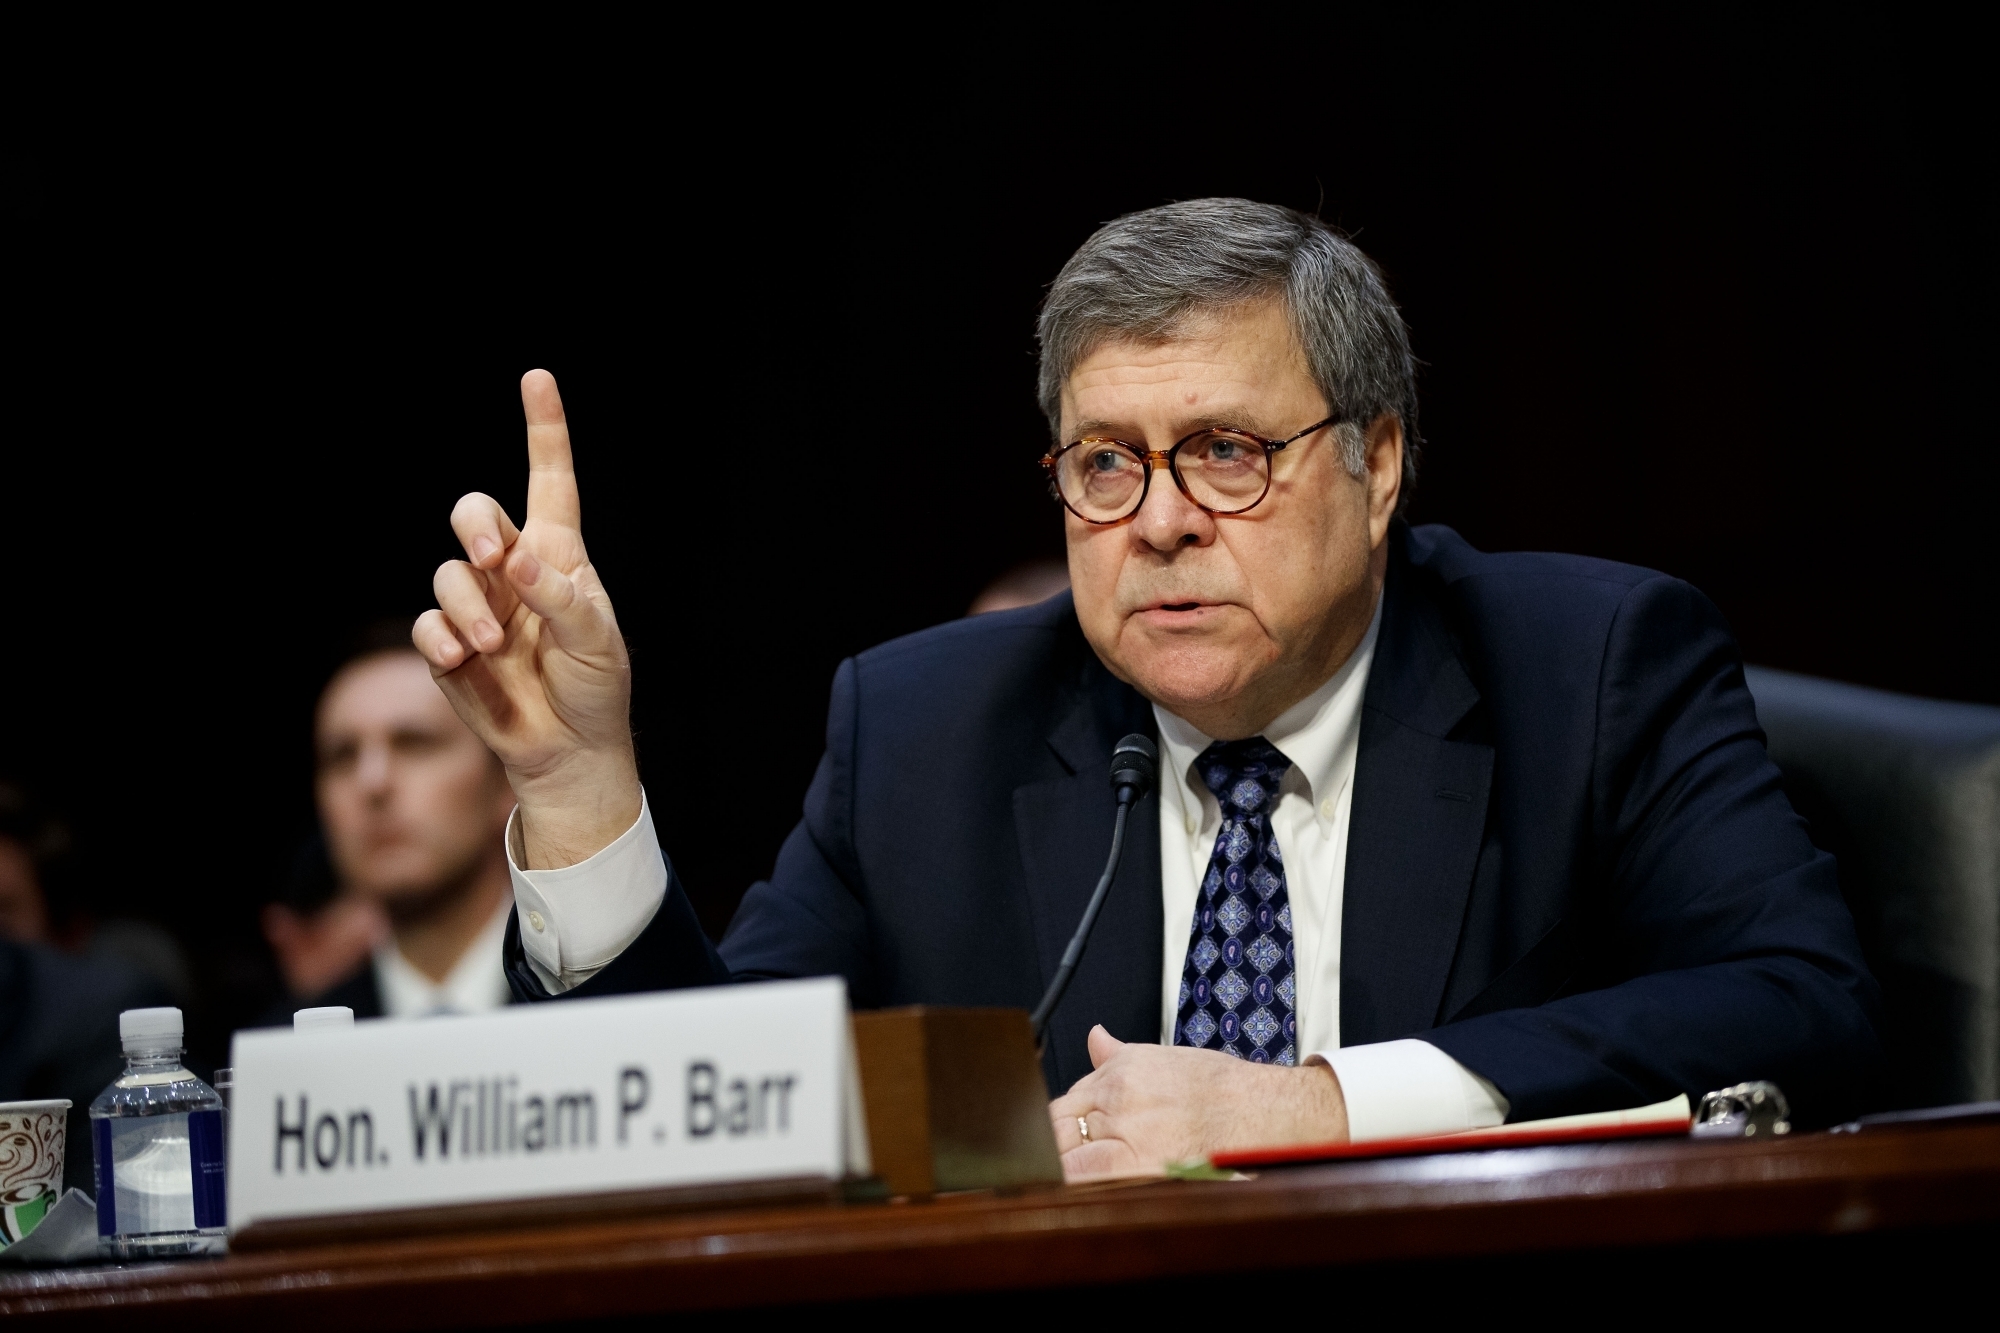 UPDATE 3-Attorney General Barr considering quitting over Trump tweets - source